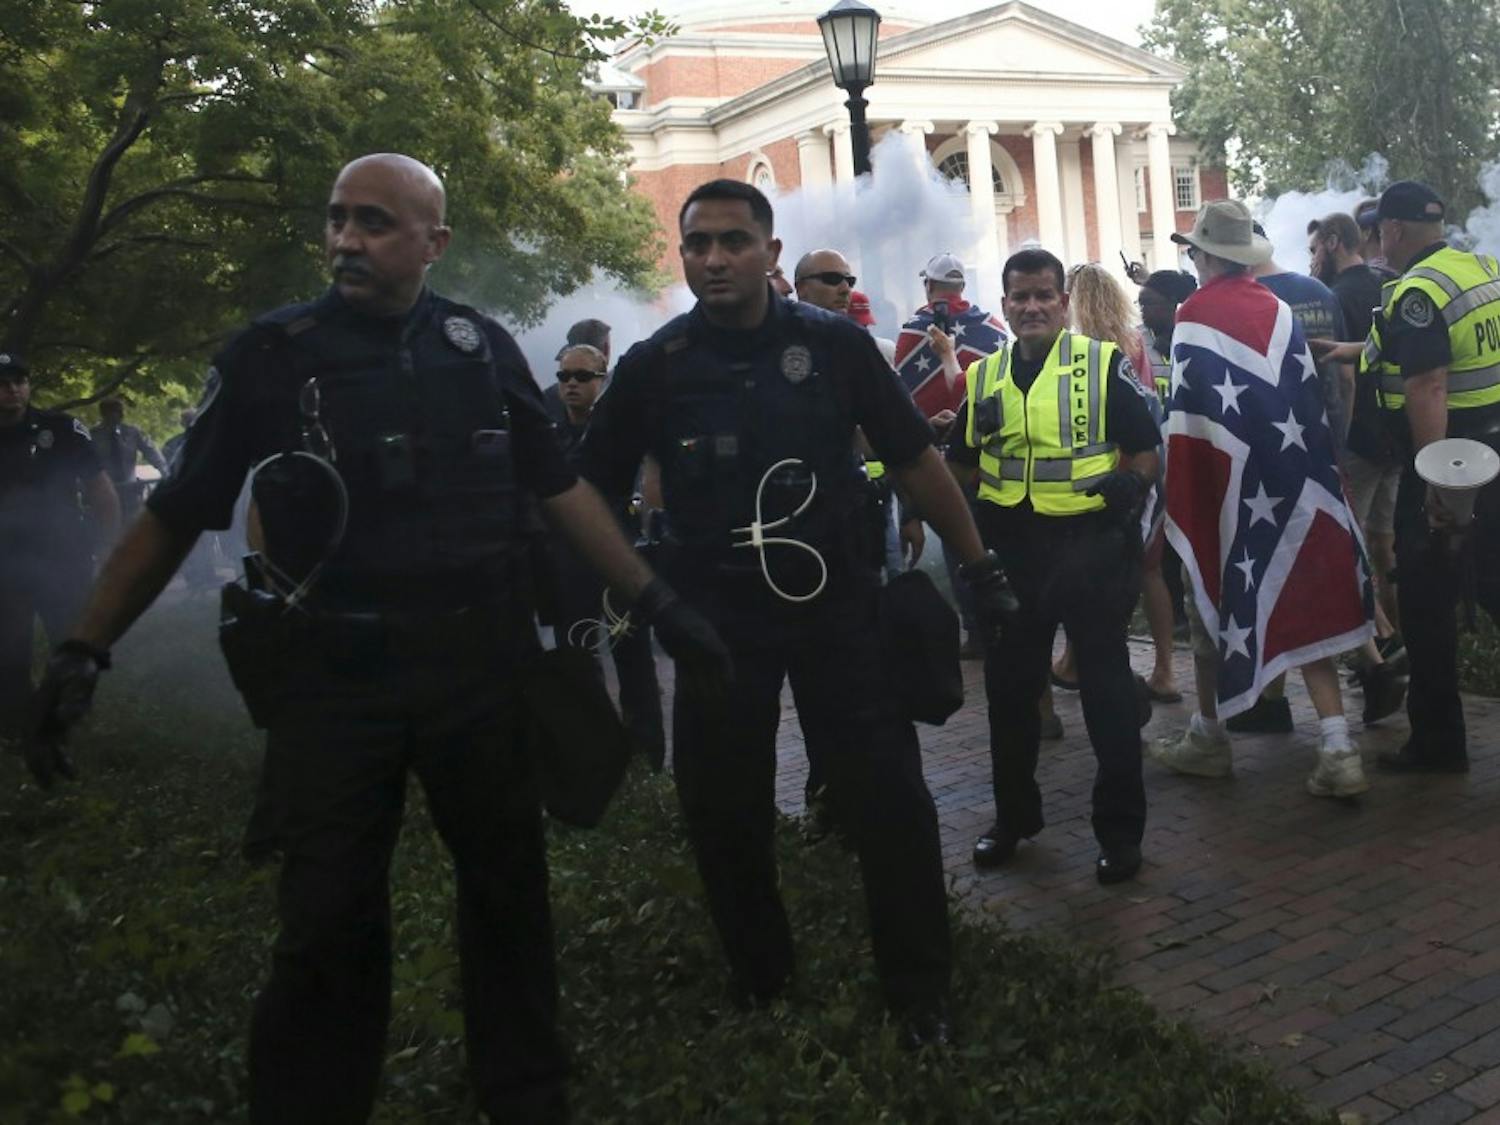 Police from across North Carolina quickly escort demonstrators from McCorkle Place after their scheduled demonstration on Saturday, September 8th.